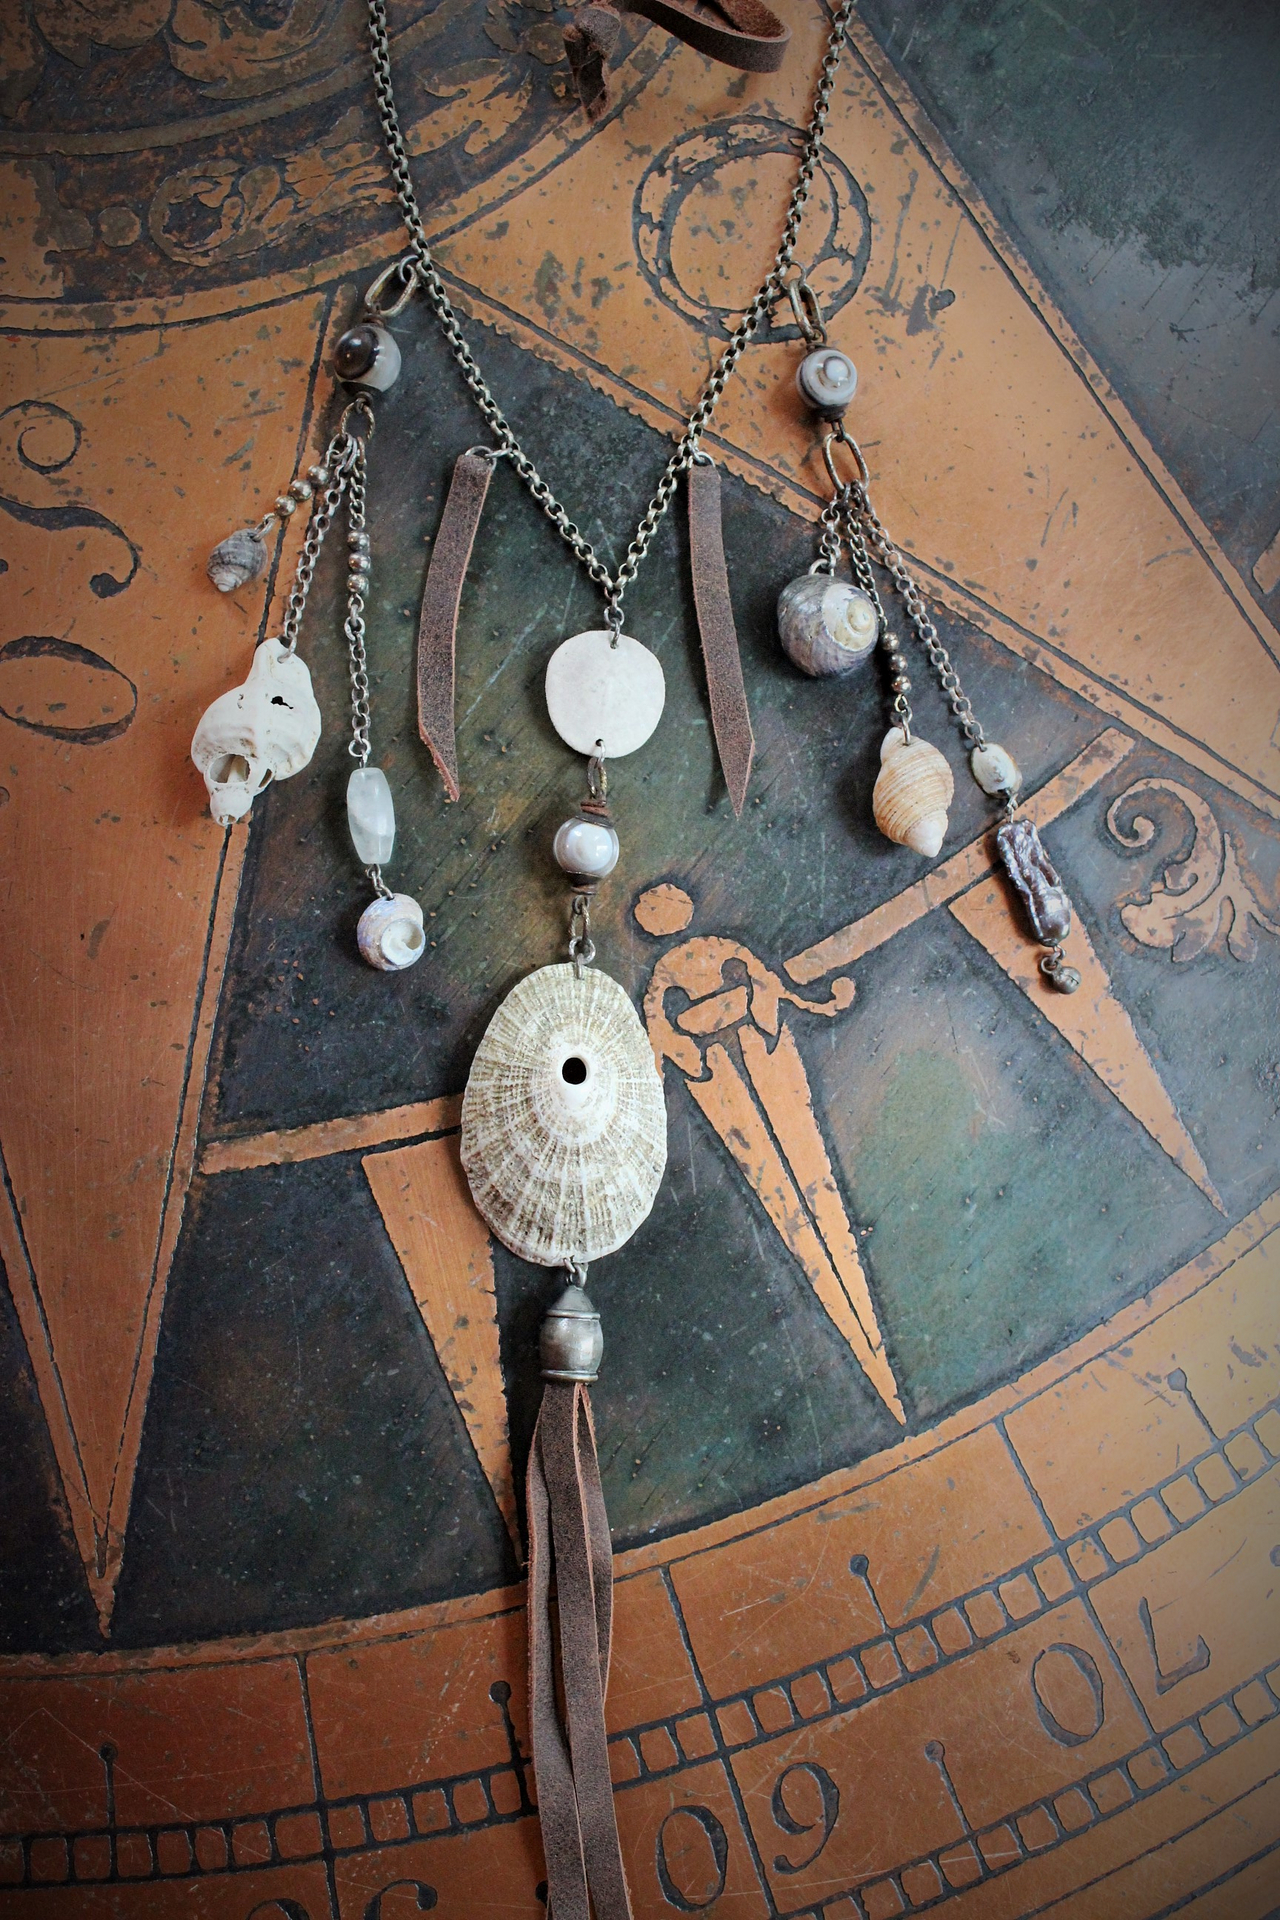 Gifts from the Sea Necklace w/Distressed Leather,Sterling Chain,Found Shells,Banded Agate,Distressed Leather Tassel